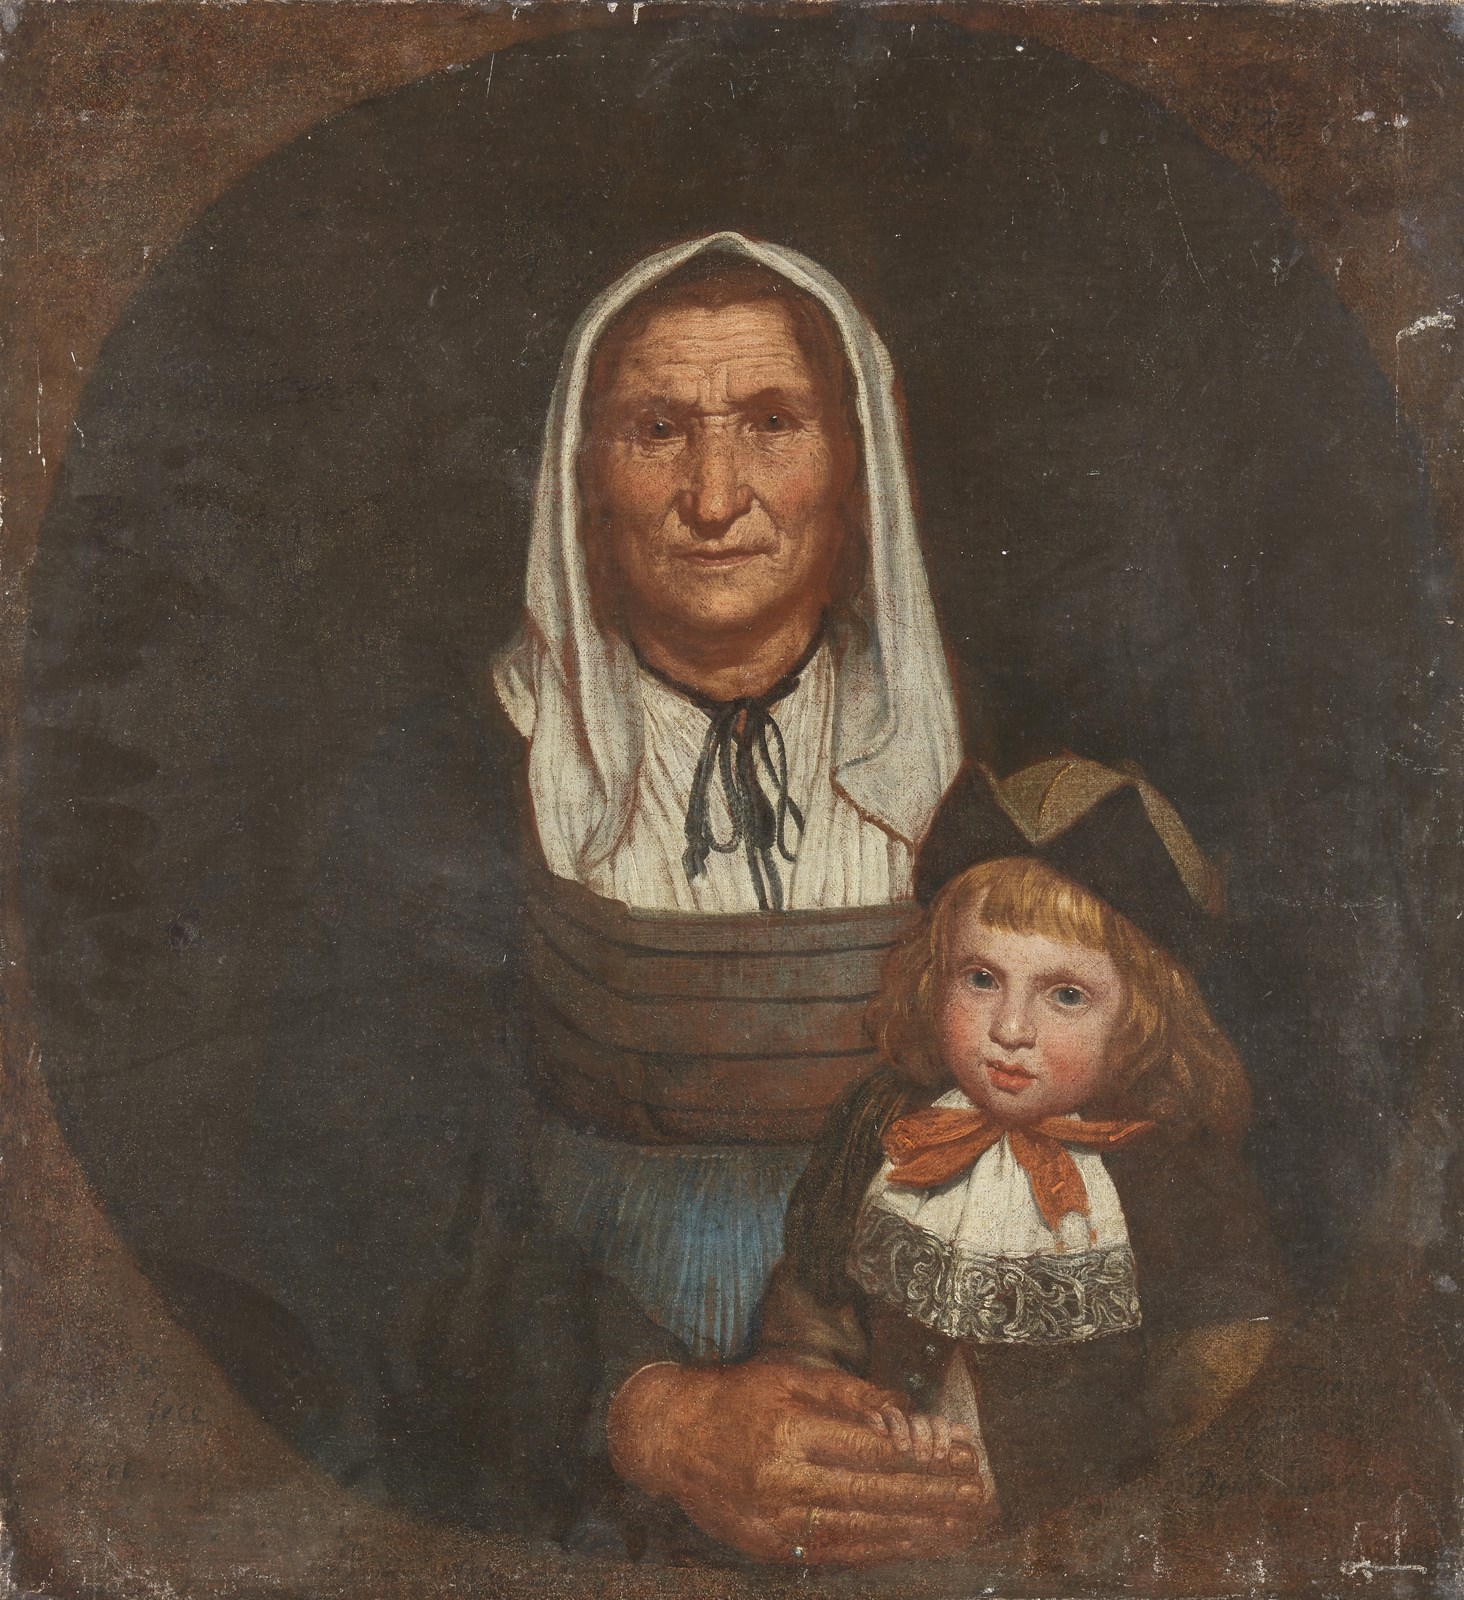 Portrait of a commoner woman and child by Brescian School, 17th Century